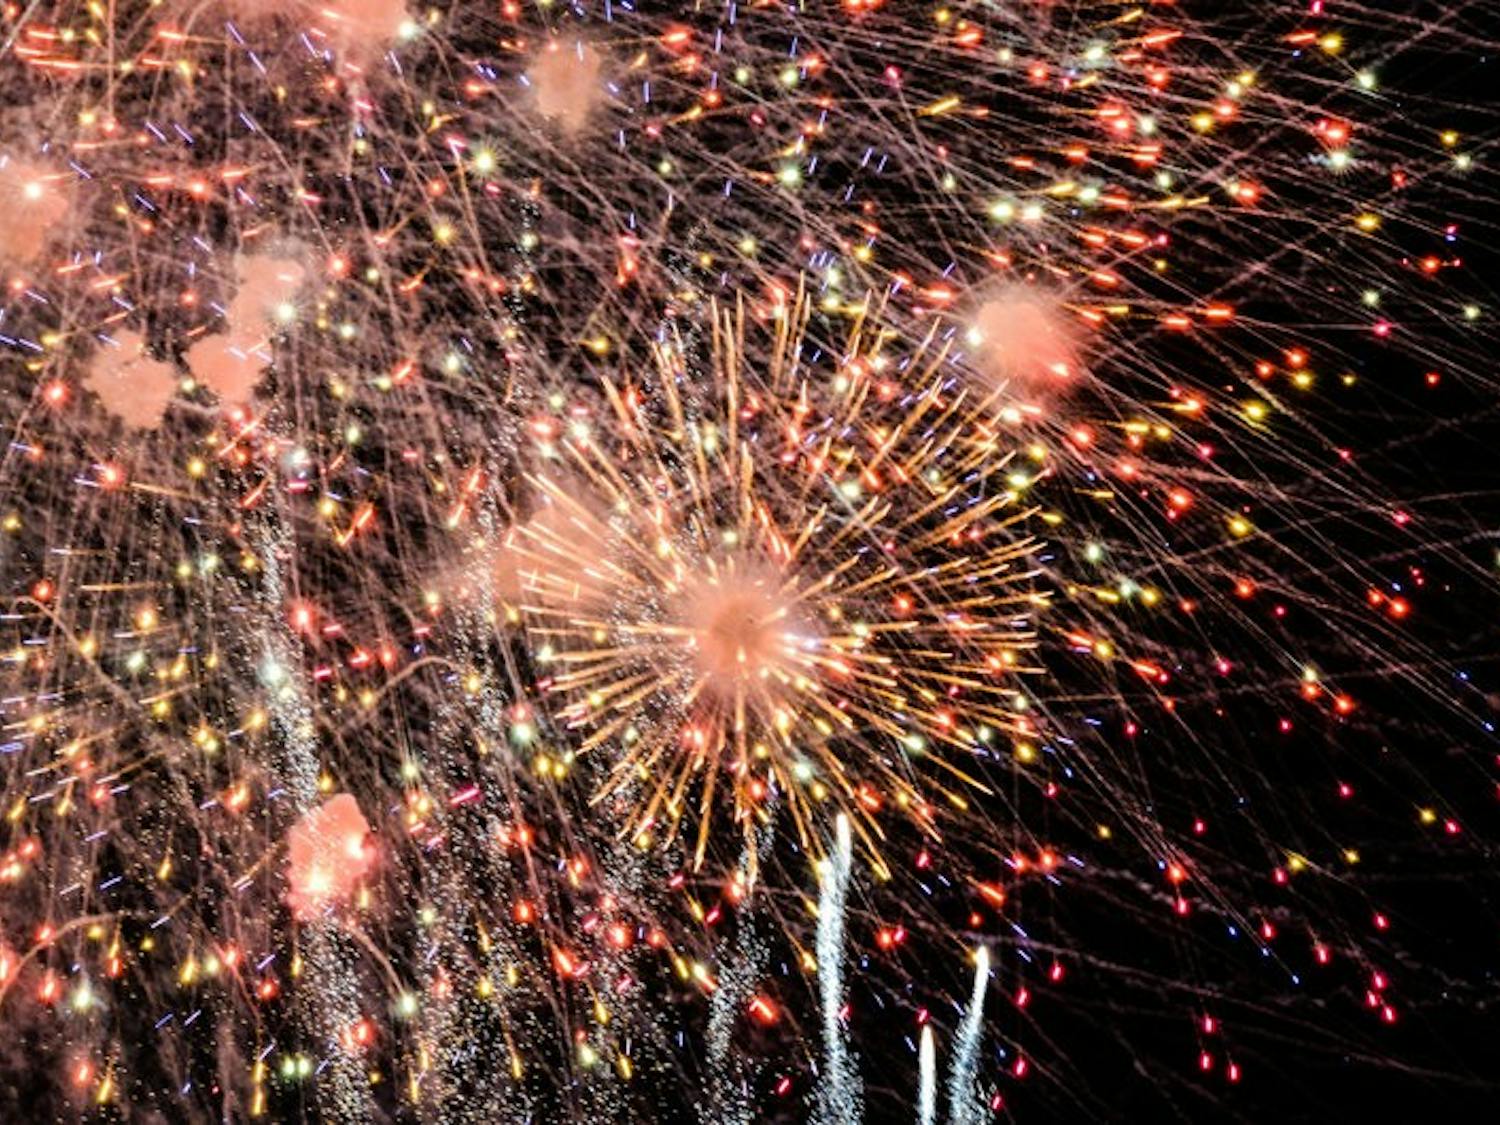 The grand finale of the fireworks display at Opelika's fourth of July celebration at Opelika High School on Thursday, July 3, 2014.Raye May / PHOTO & DESIGN EDITORContributed by Raye May